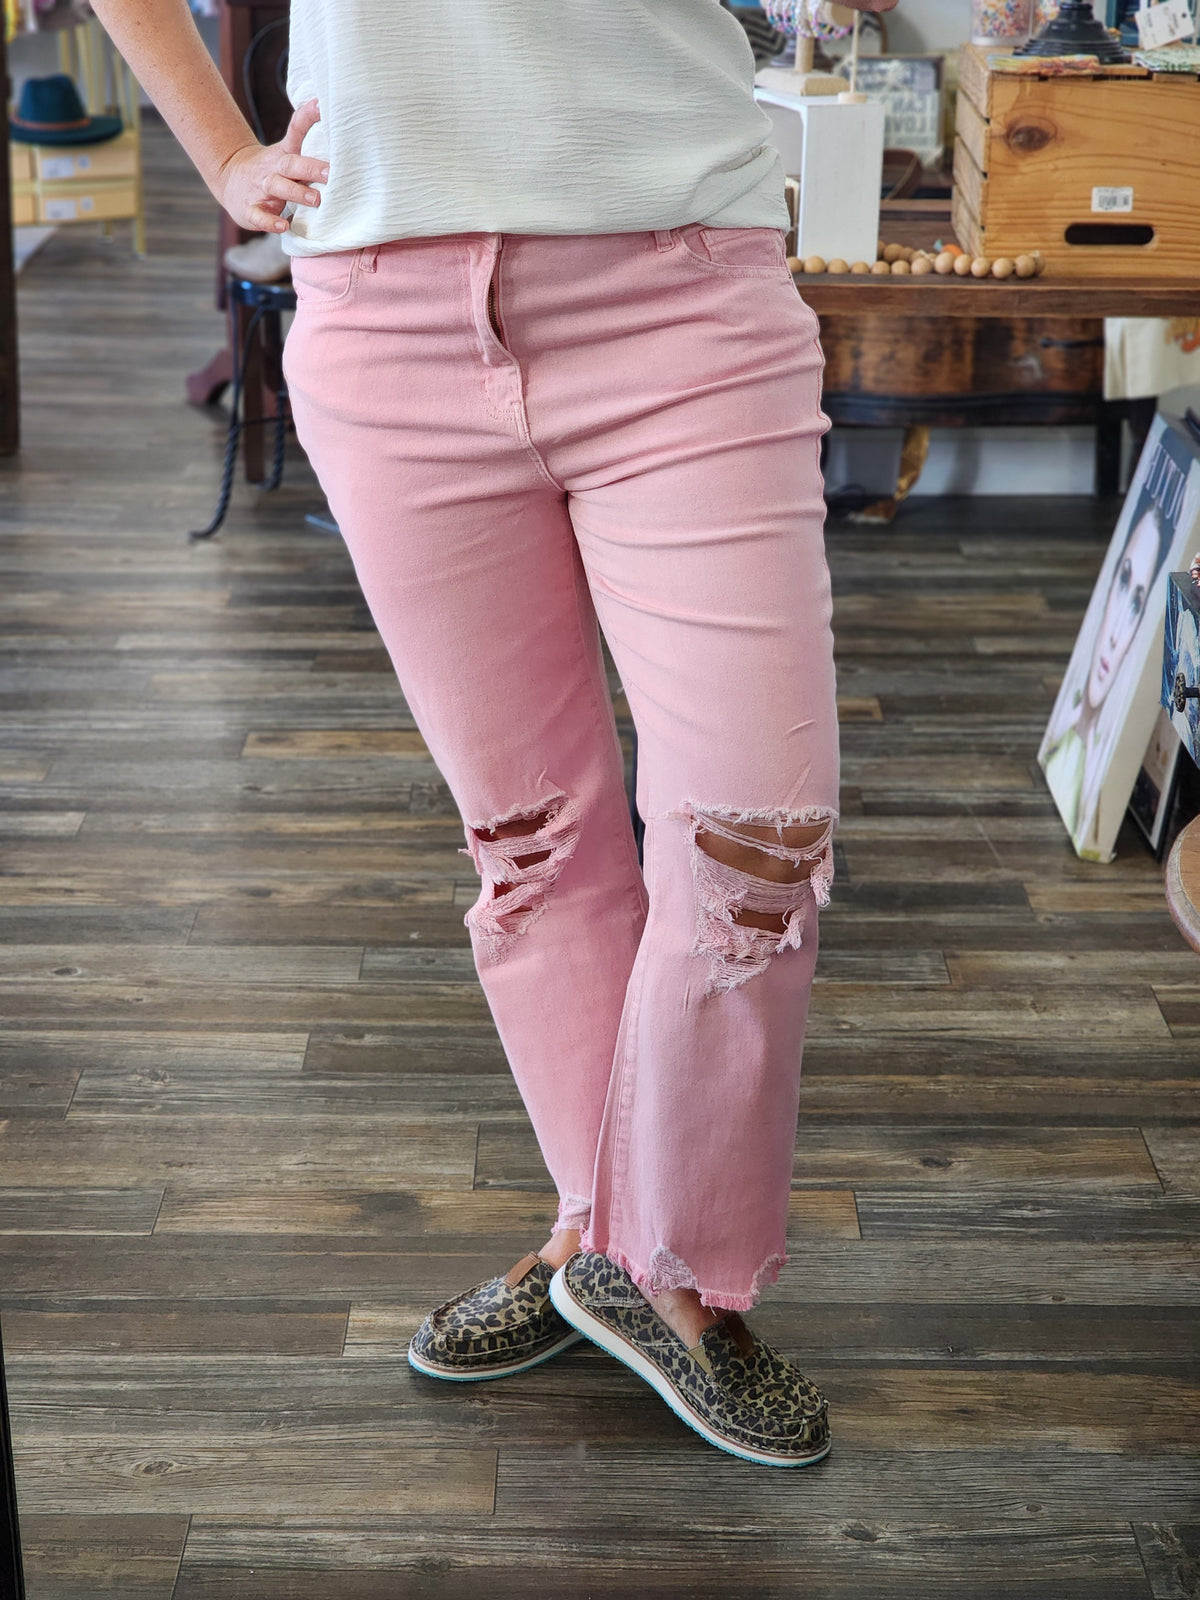 Janis Acid Wash Fray Jeans in pink